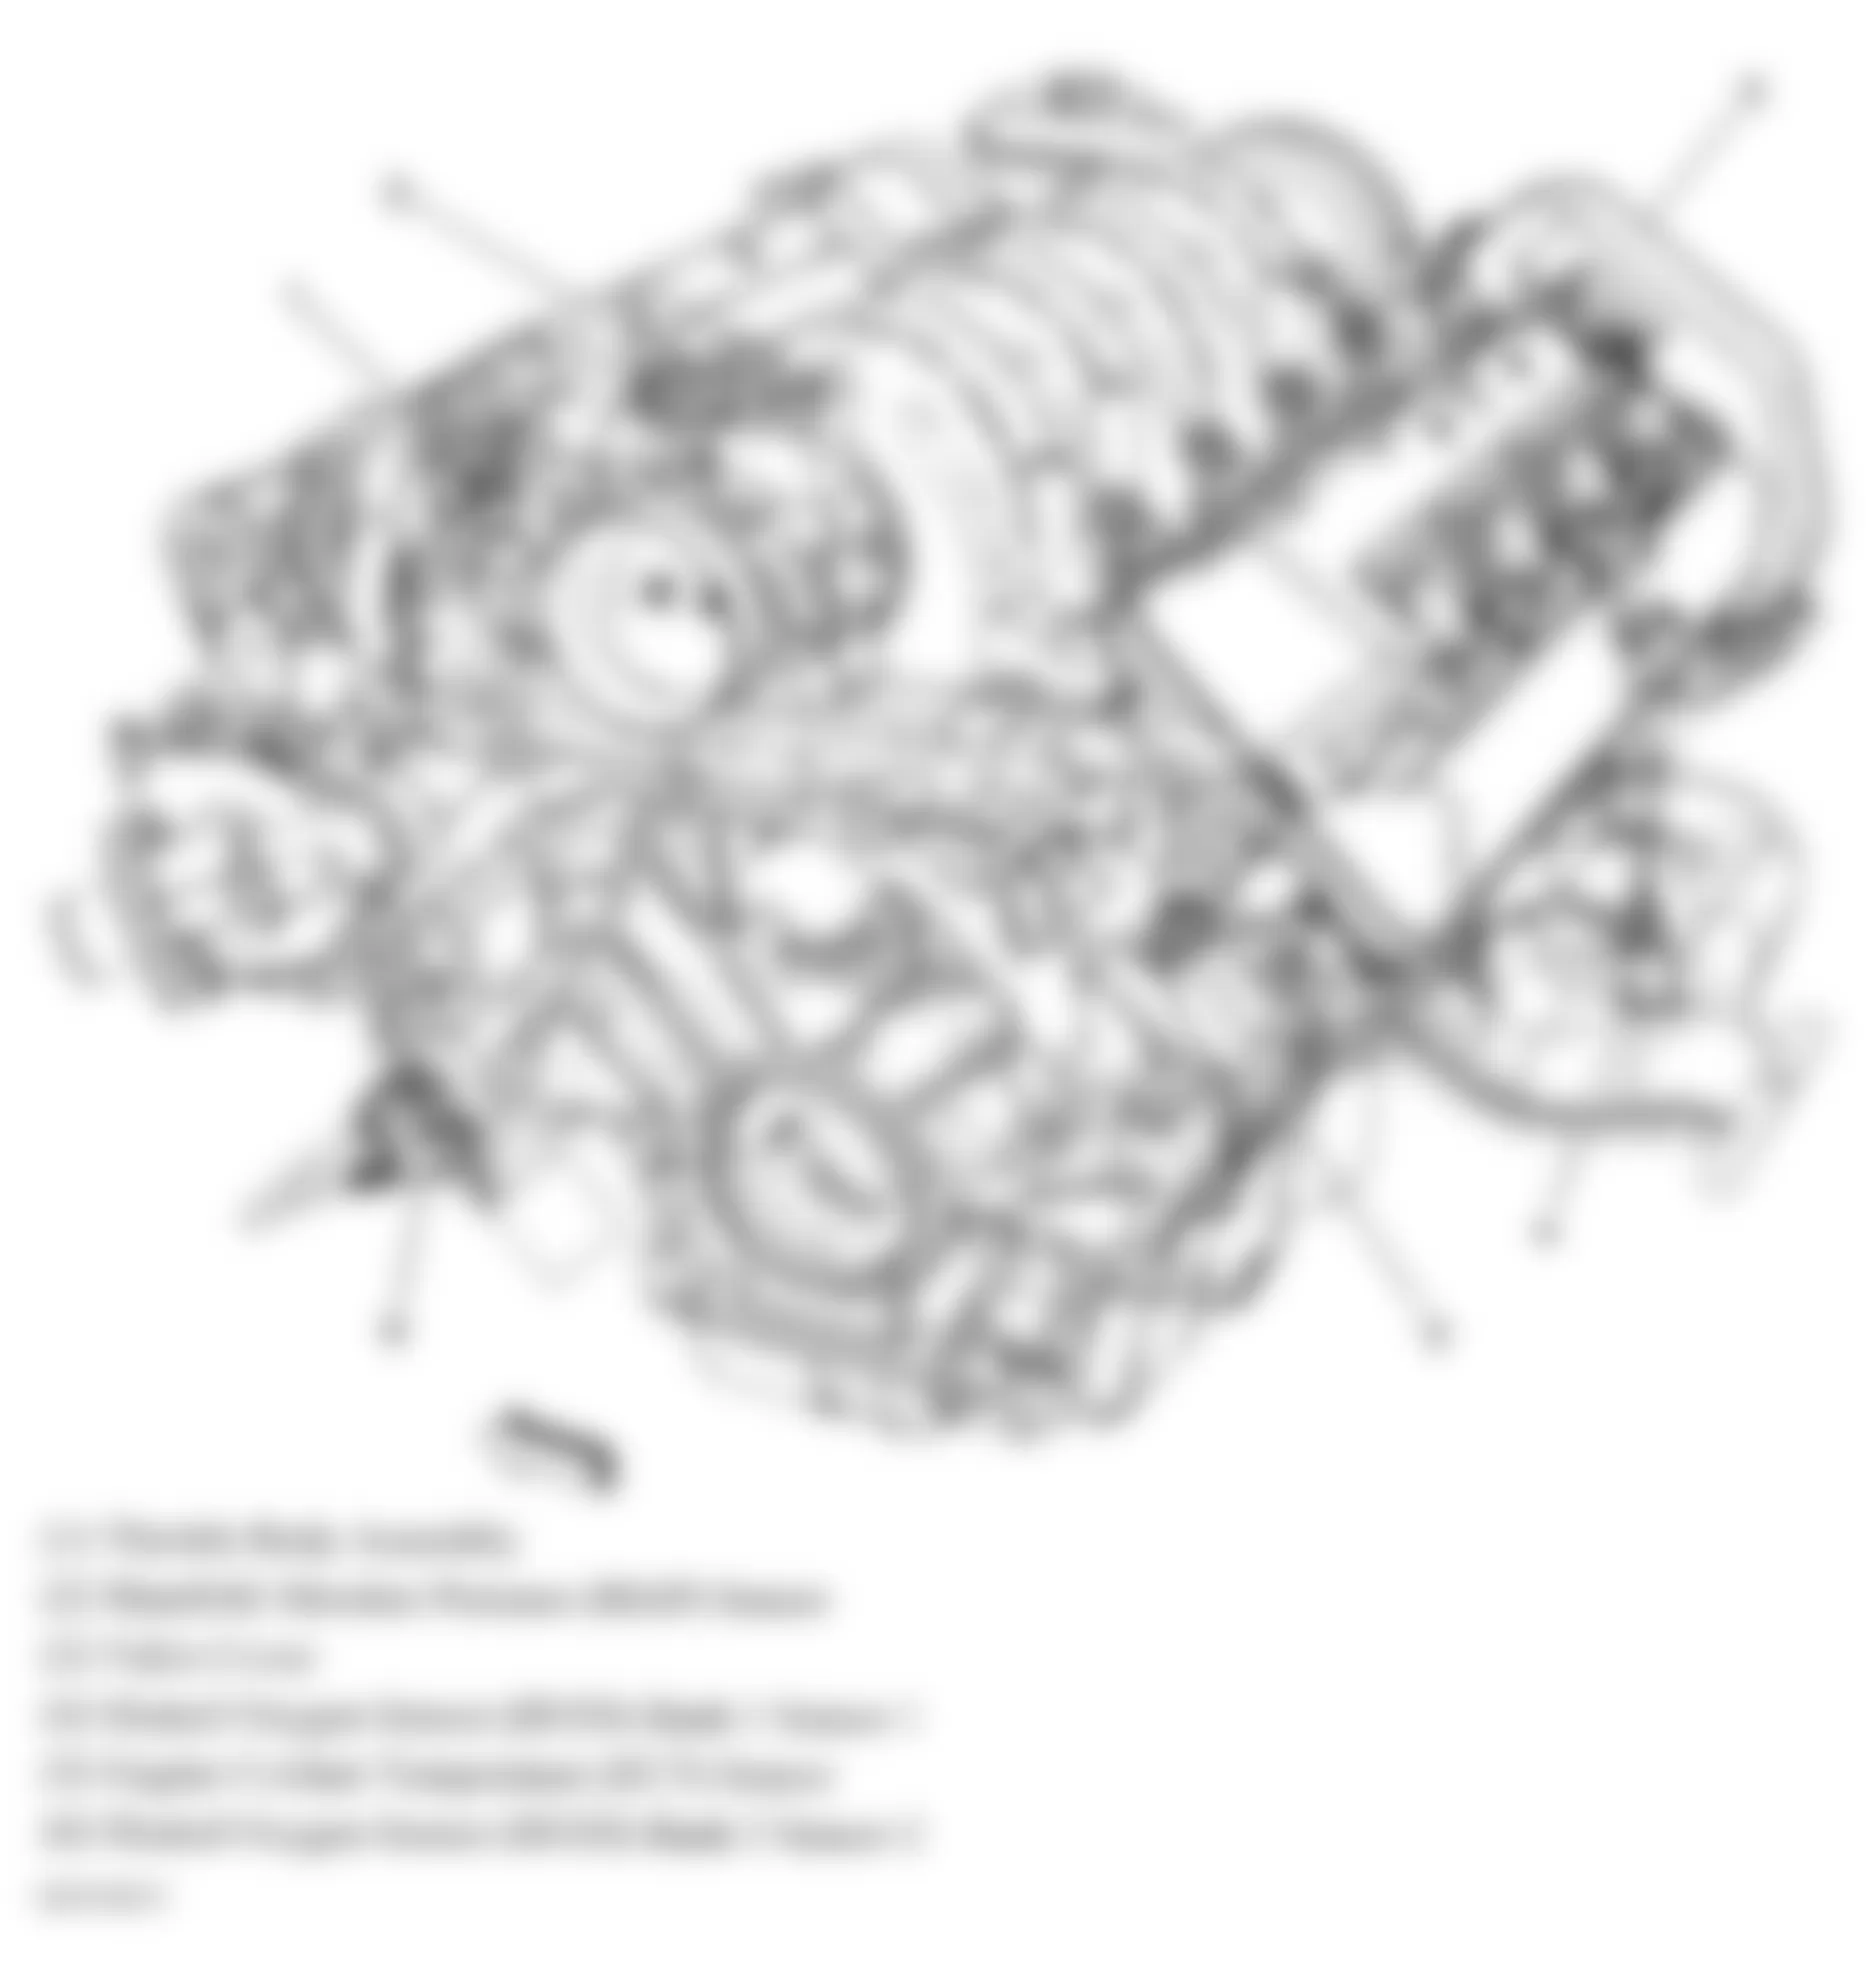 Buick Lucerne CXL 2006 - Component Locations -  Rear Of Engine (4.6L)